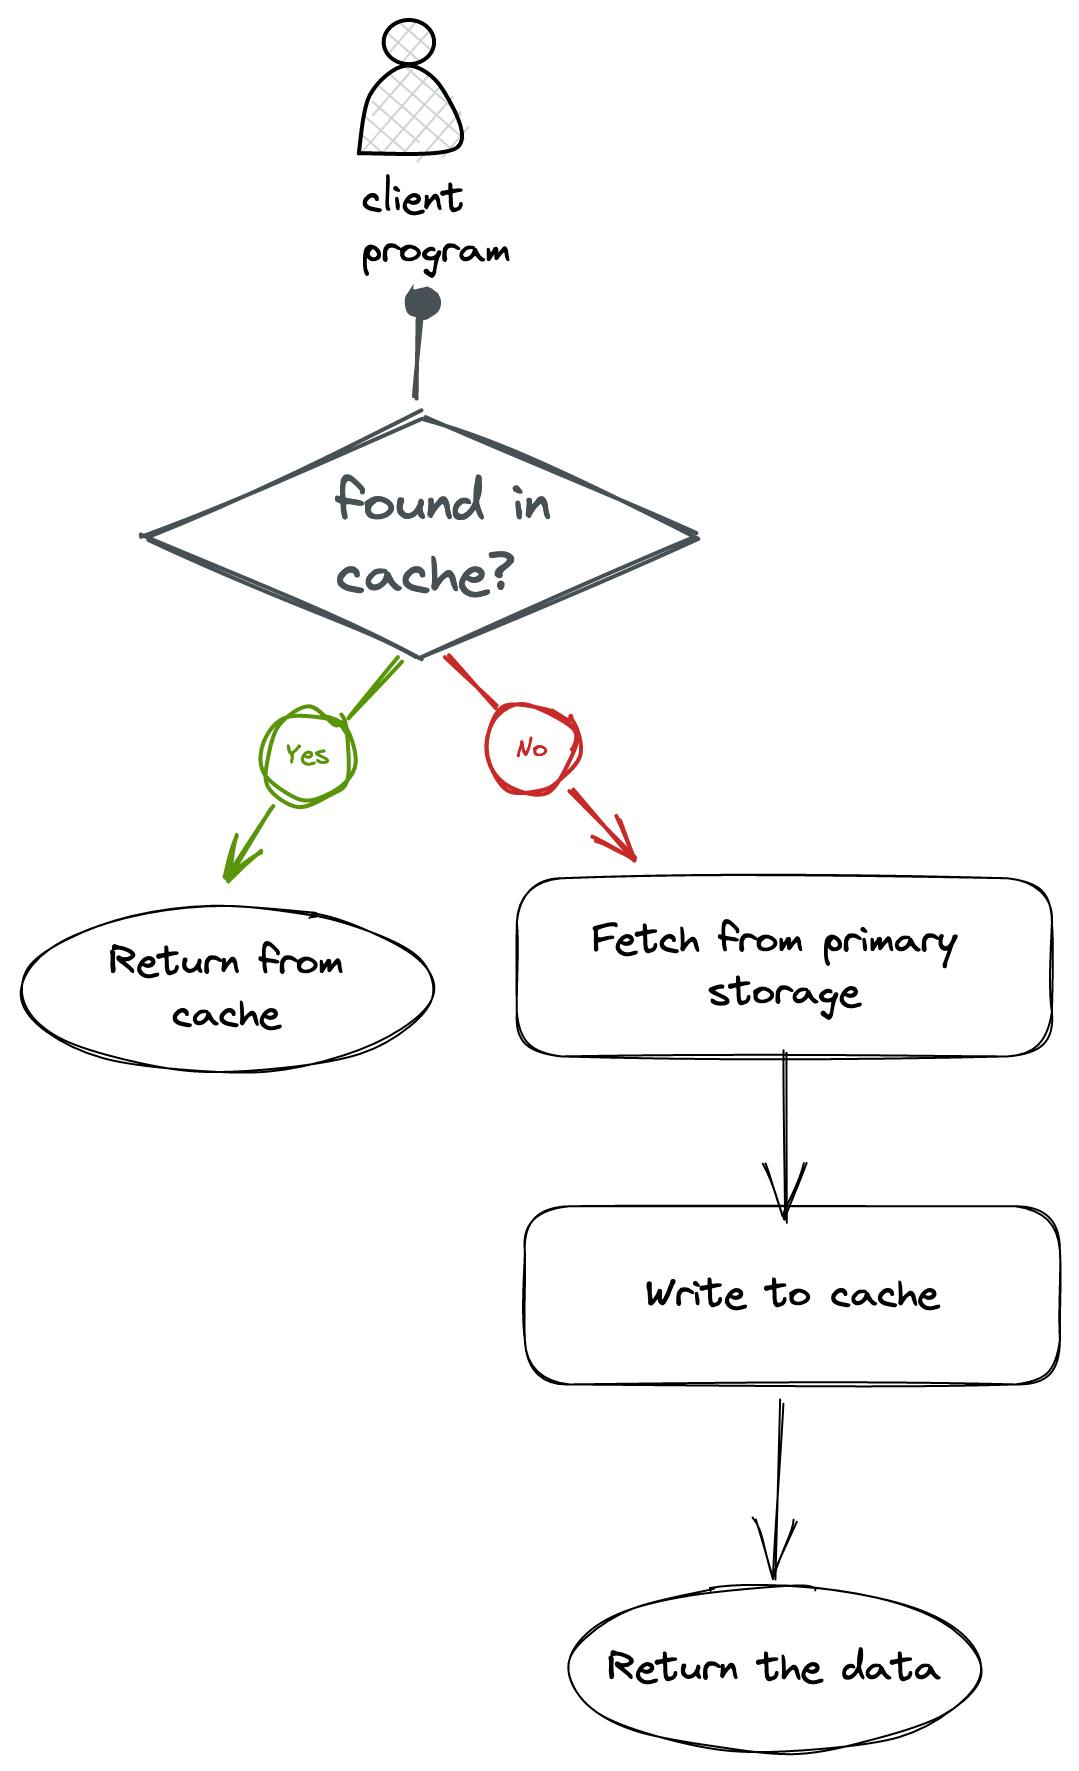 An iamge showing flow of cache